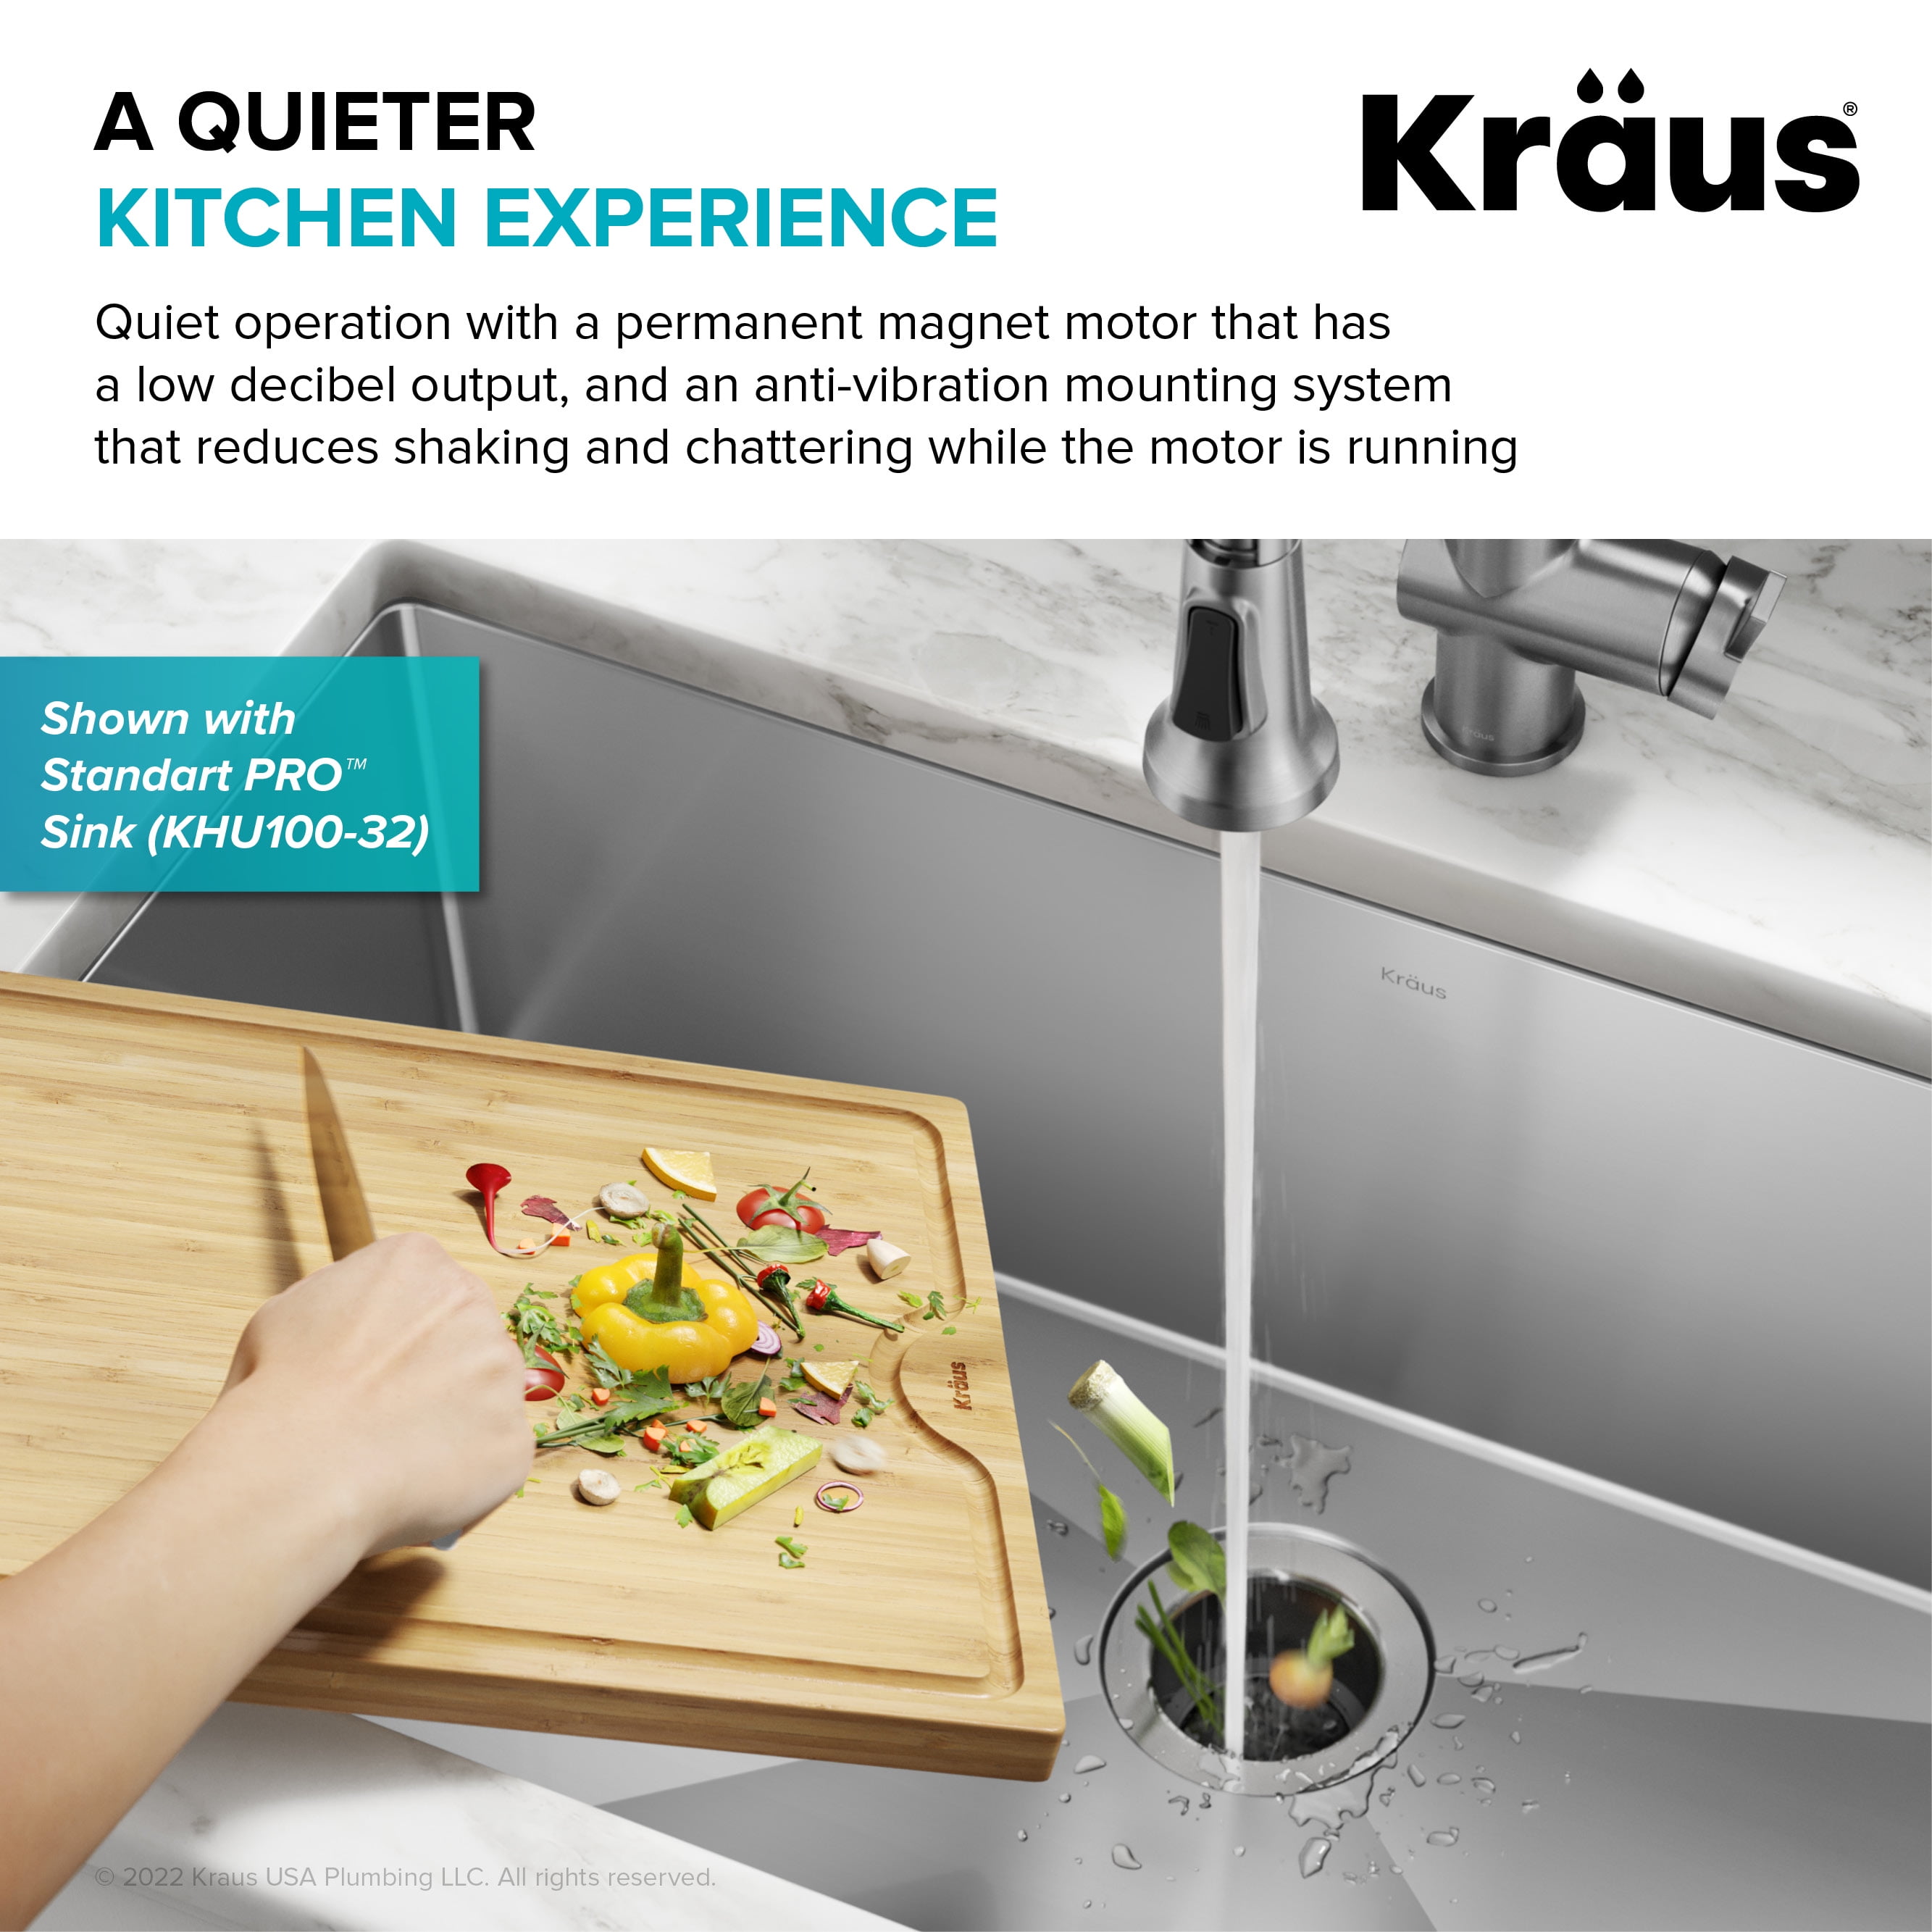 Kraus WasteGuard High-Speed 1/2 HP Continuous Feed Garbage Disposal 